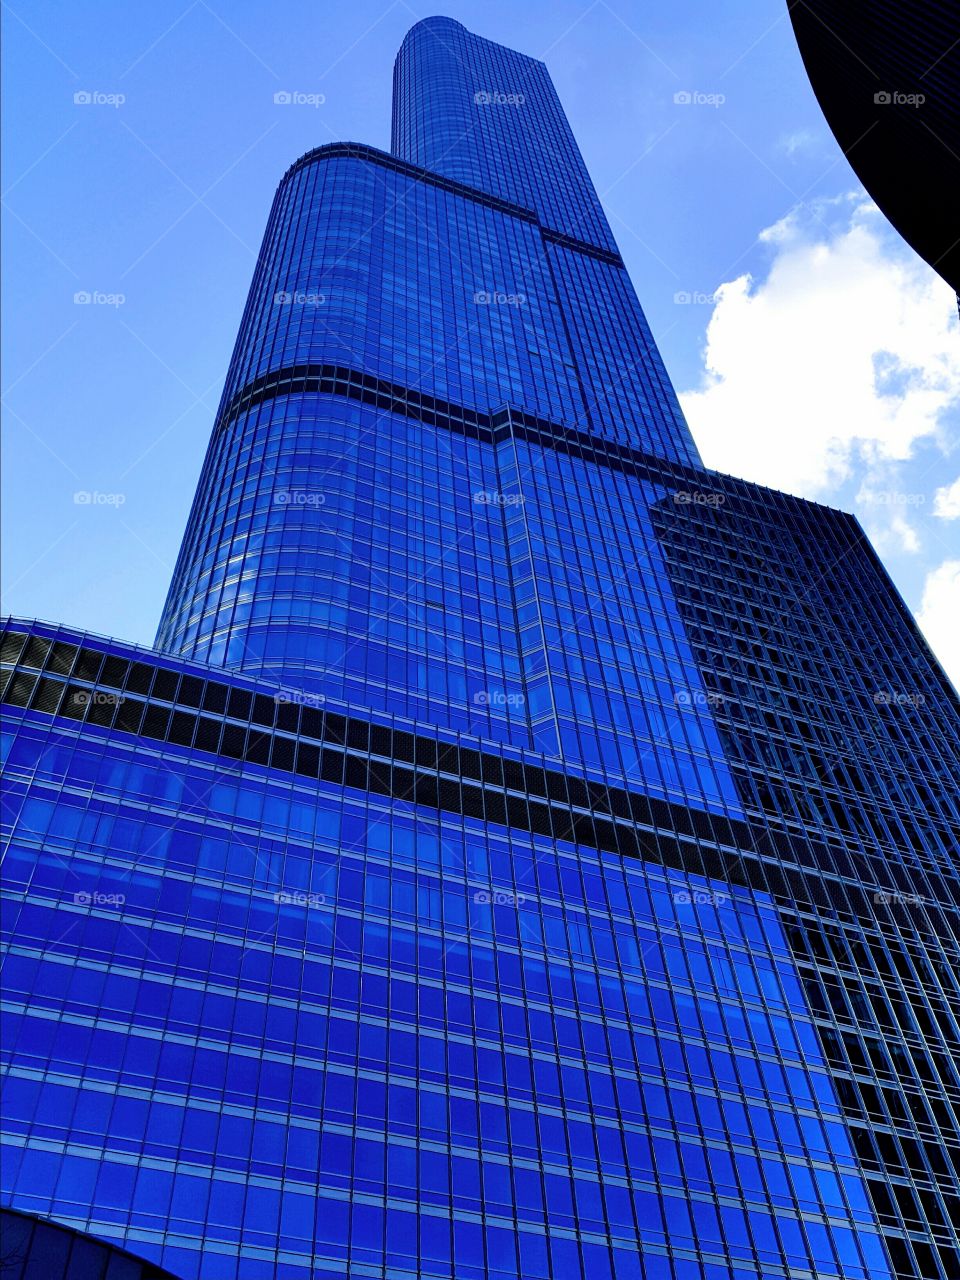 Trump Tower in Chicago